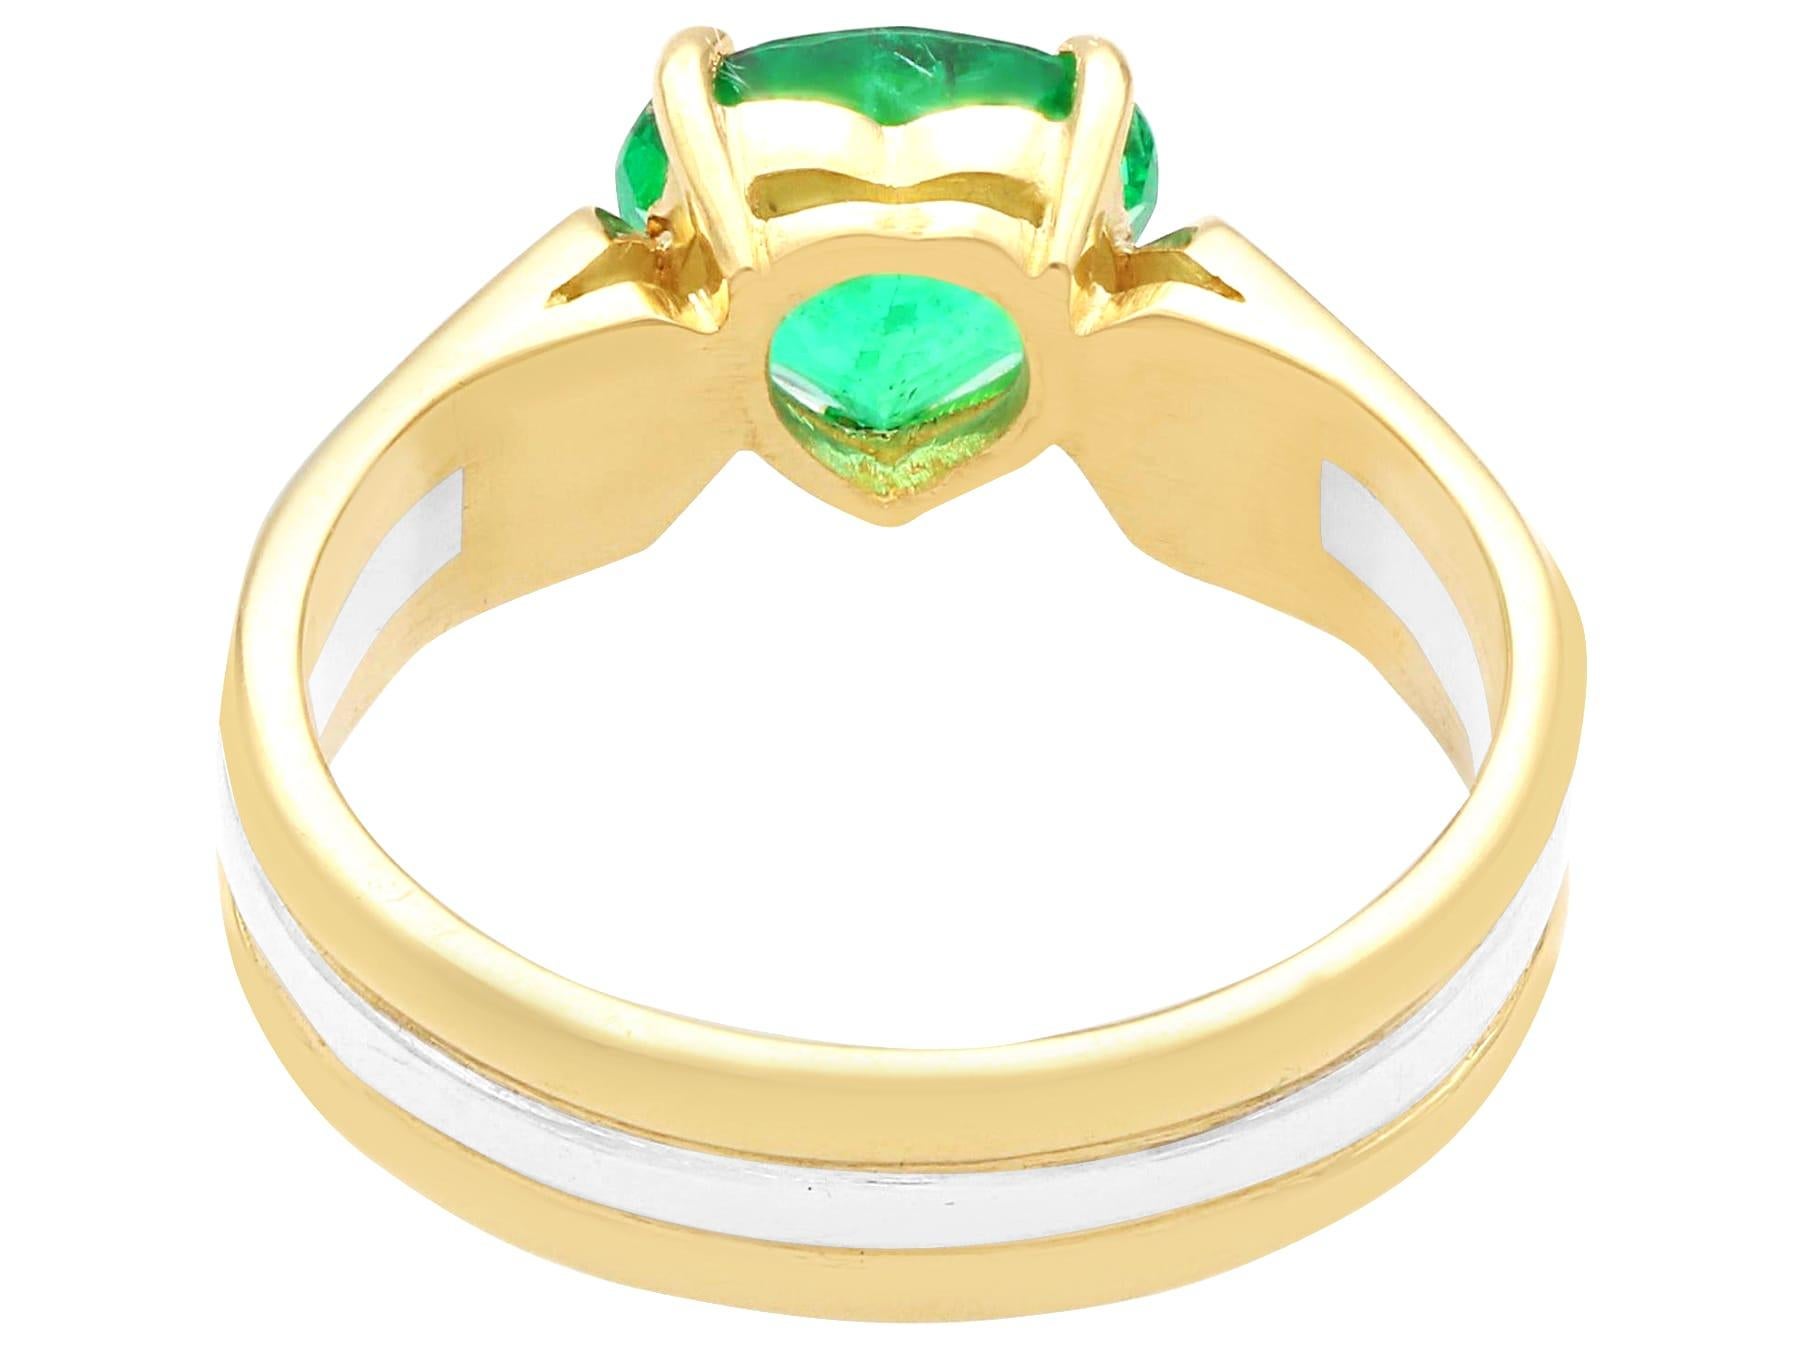 Vintage 1.02 Carat Emerald 18 Carat Yellow Gold and Platinum Ring In Excellent Condition For Sale In Jesmond, Newcastle Upon Tyne